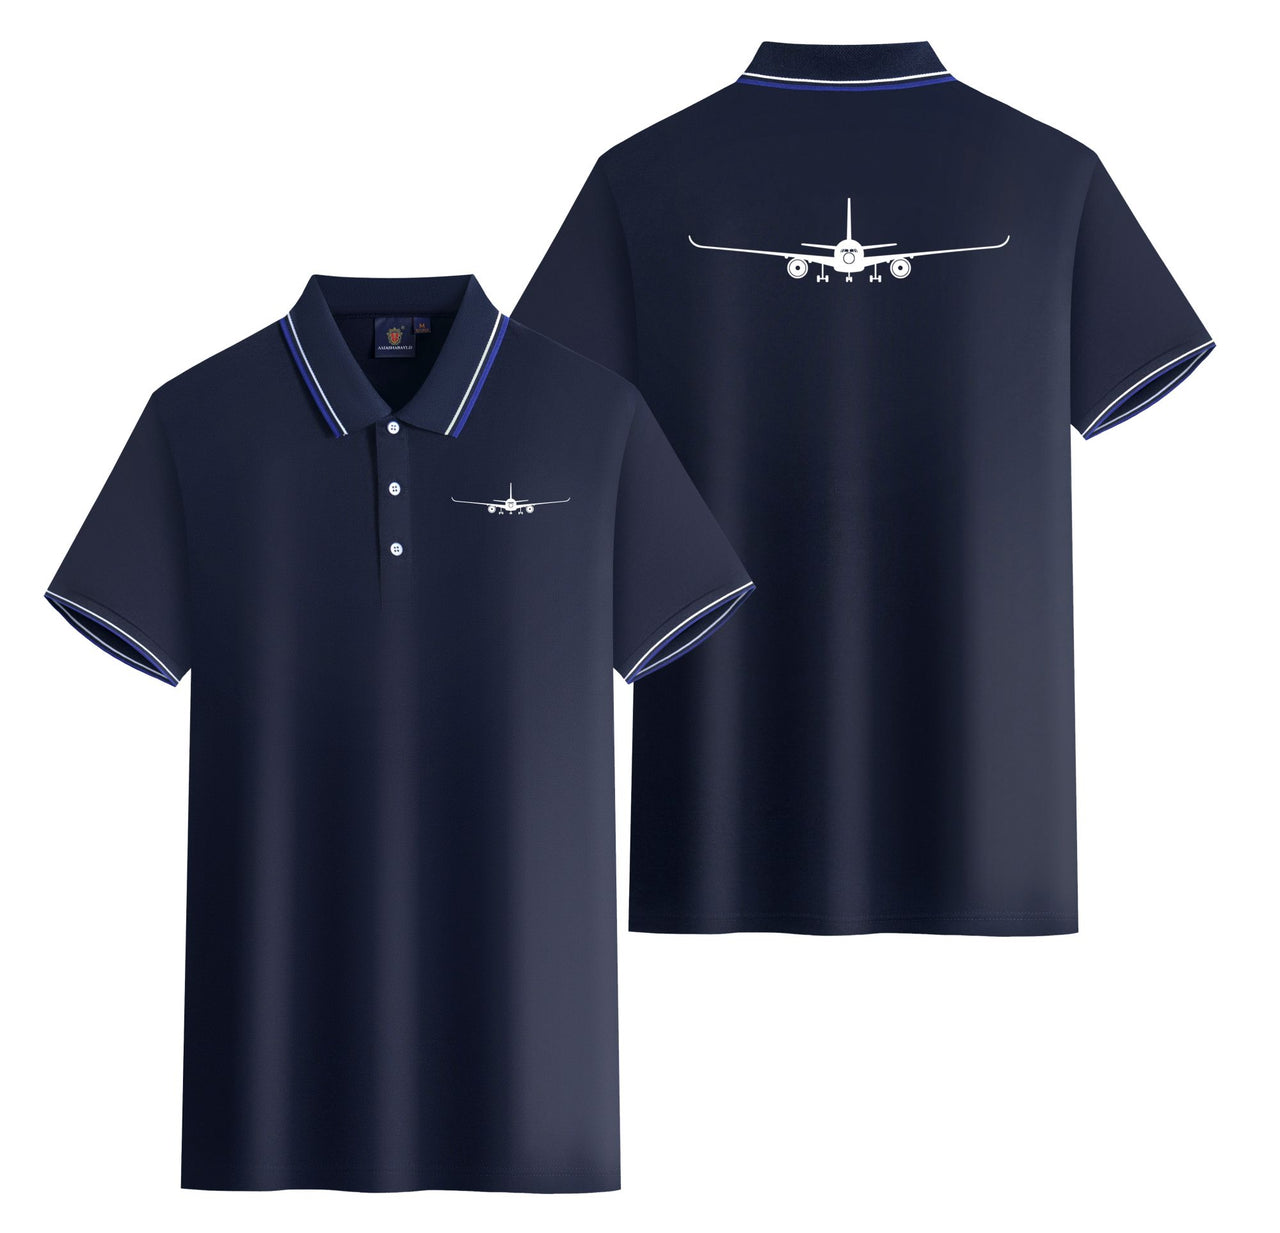 Airbus A350 Silhouette Designed Stylish Polo T-Shirts (Double-Side)